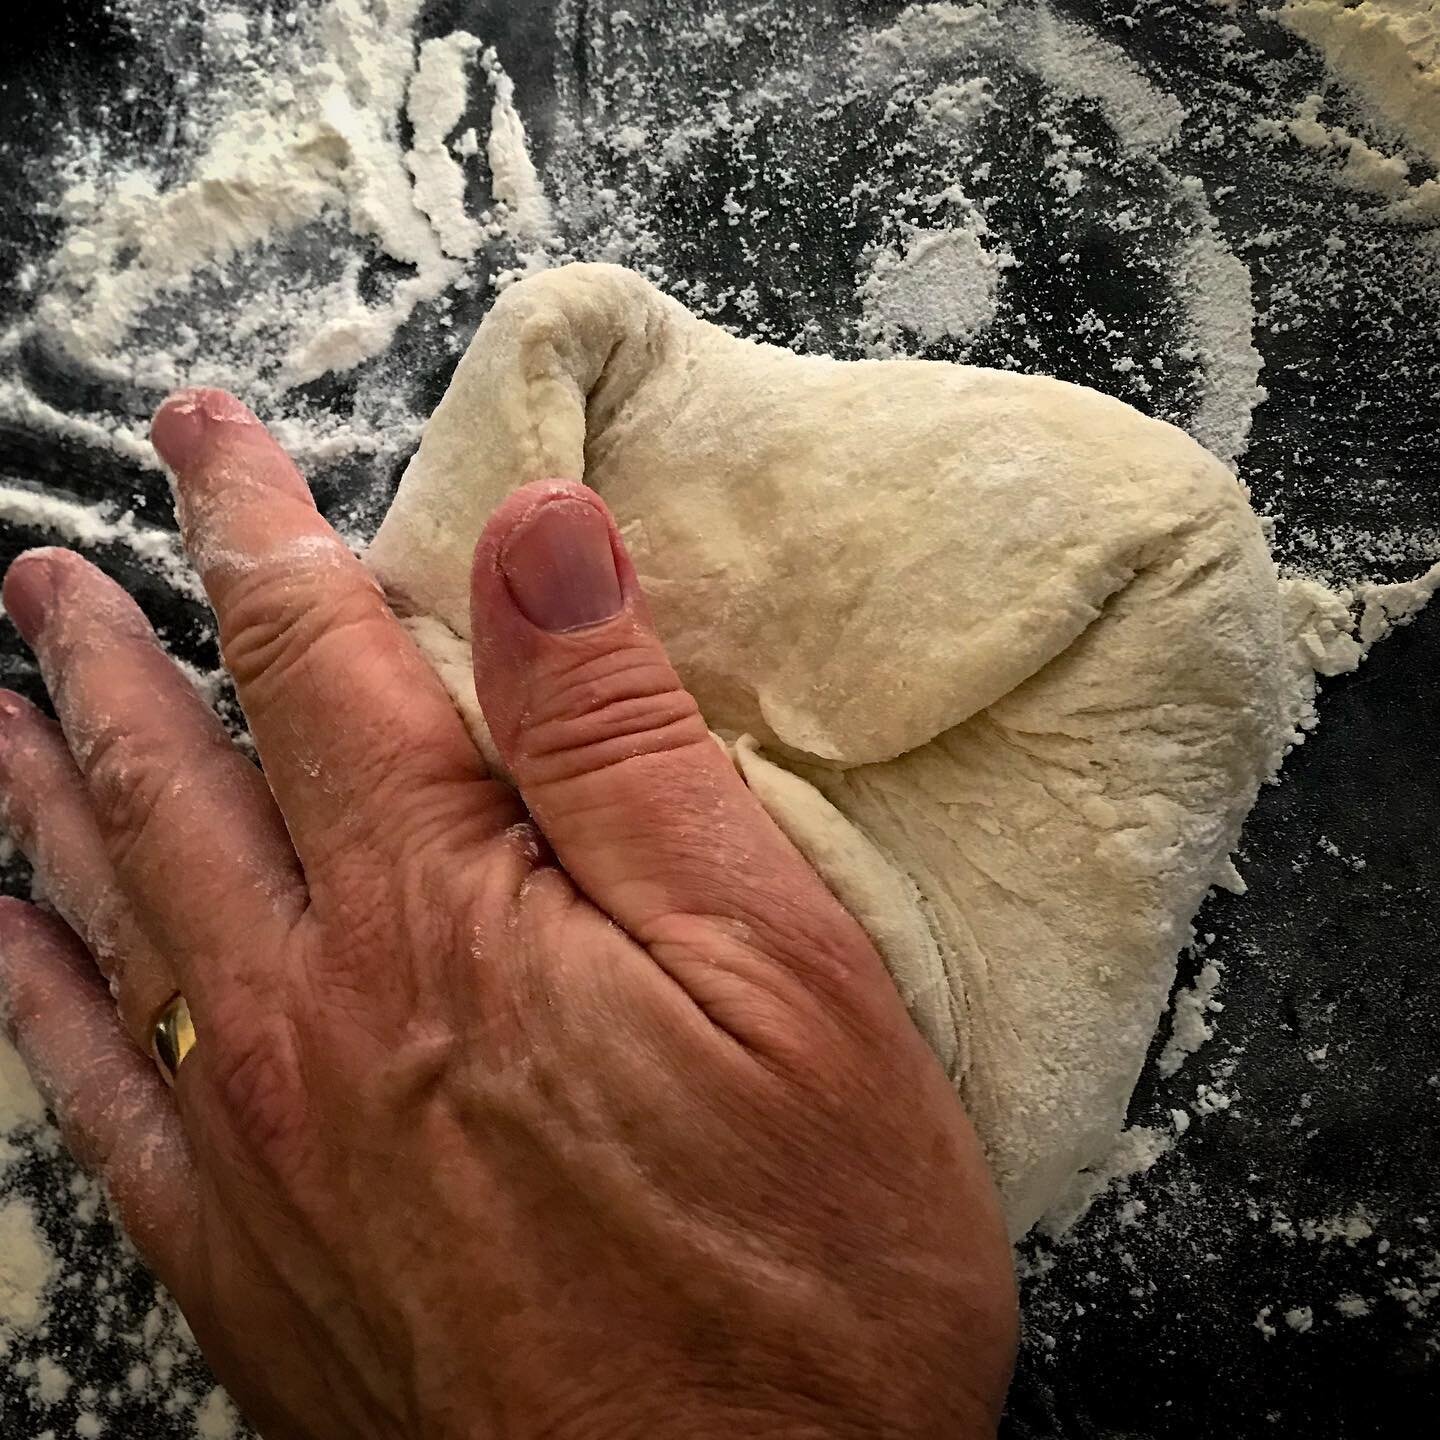 Pizza dough for tonight. Taking a break from my big documentary editing project and this is the perfect change of pace. #artofbaking #pizza #hunkerhome